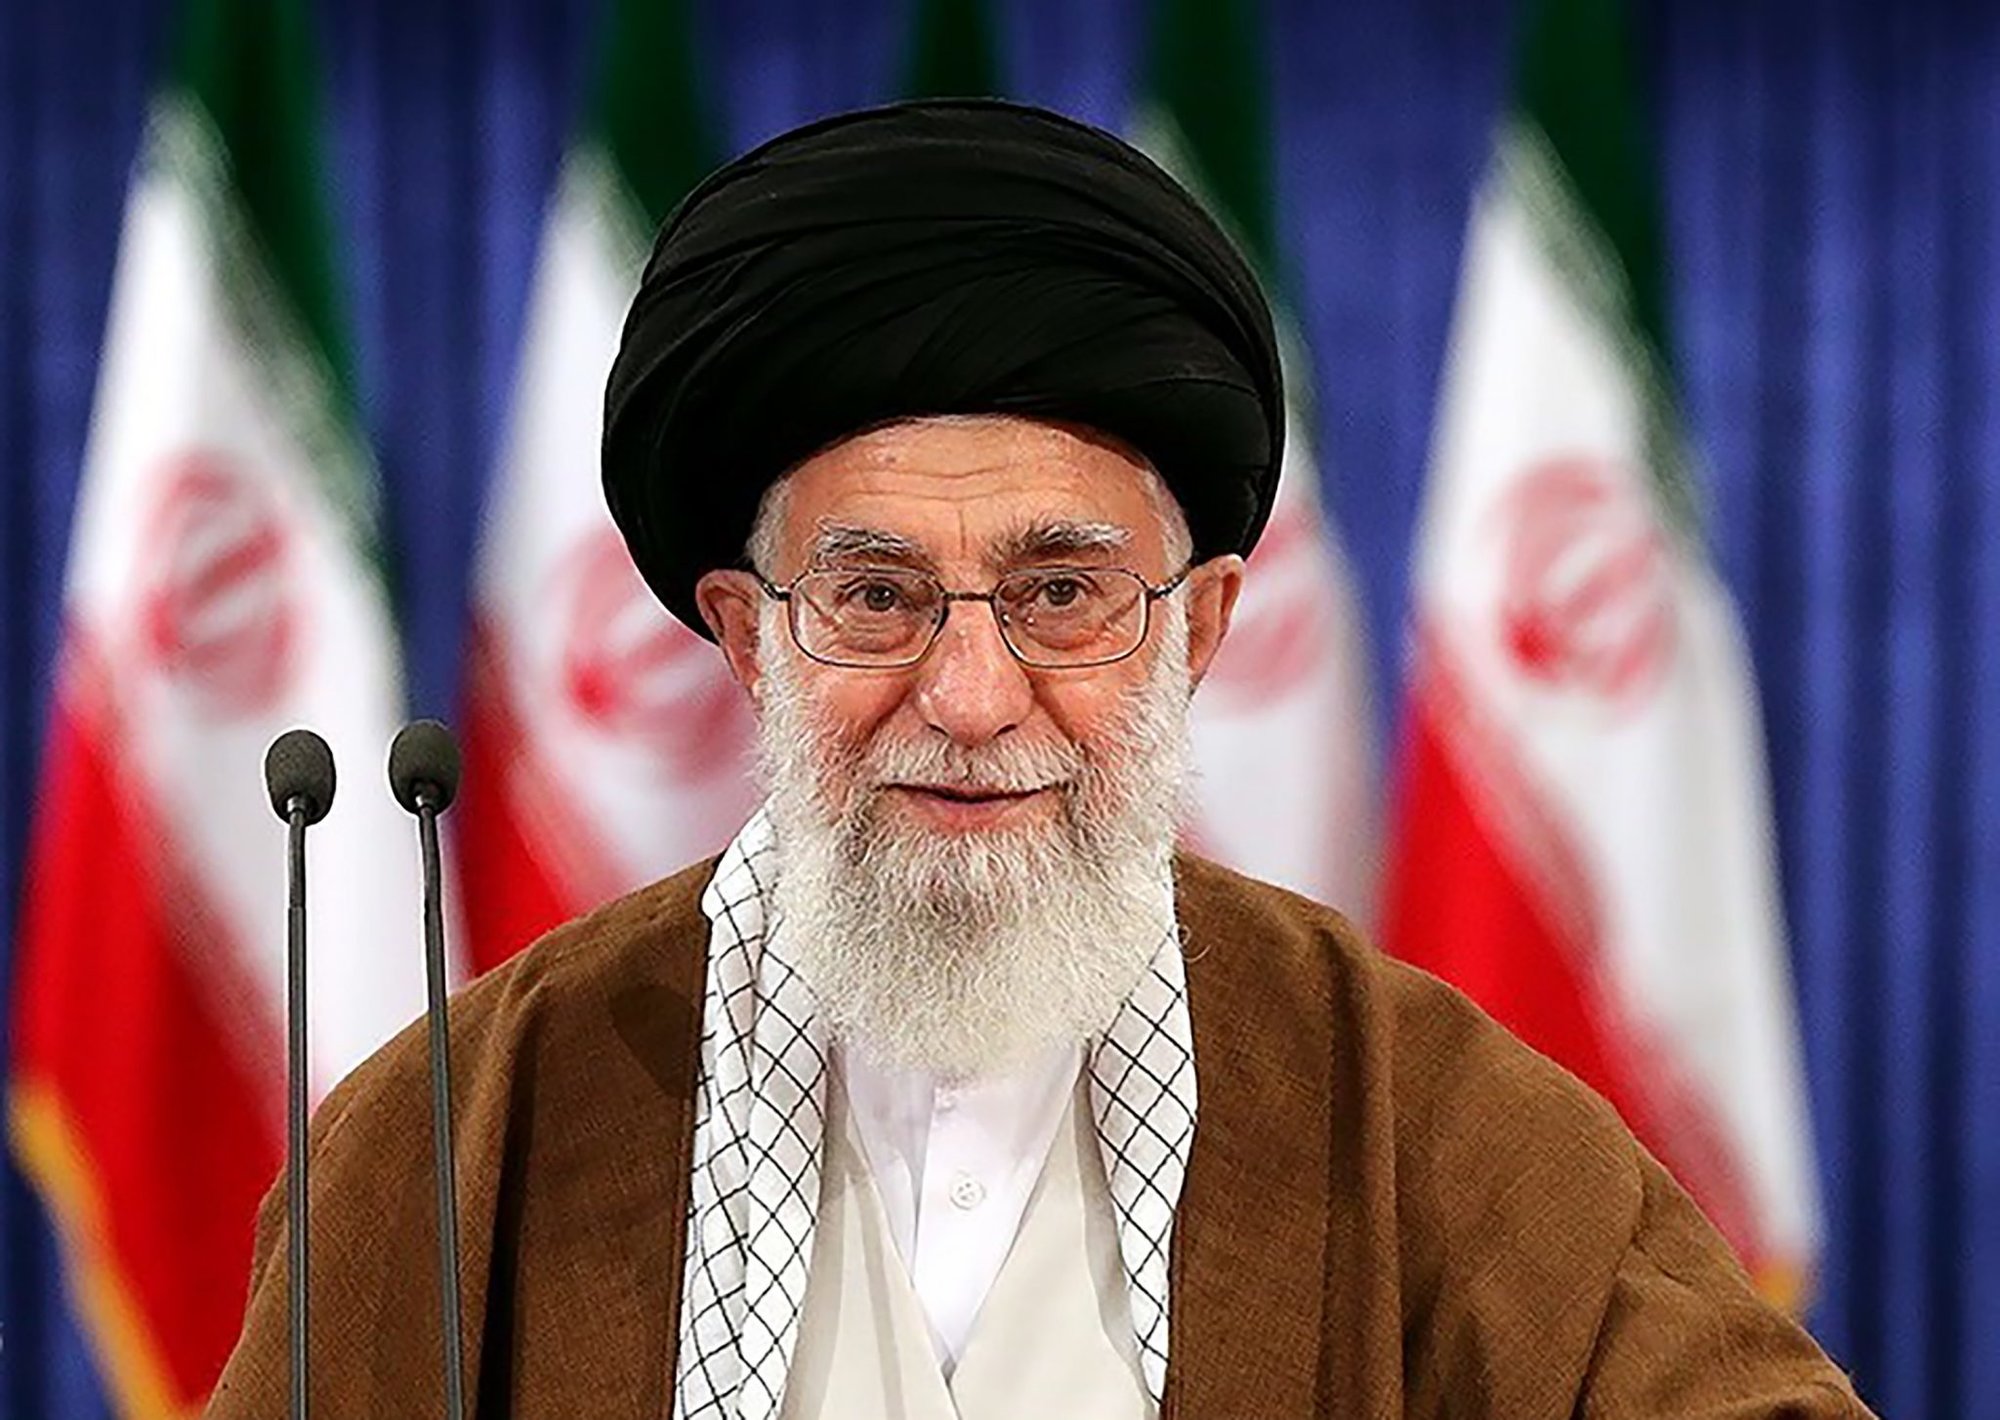 Iranian Supreme Leader Ayatollah Ali Khamenei casting his vote for 2017 presidential and local election. Wikimedia Commons photo.